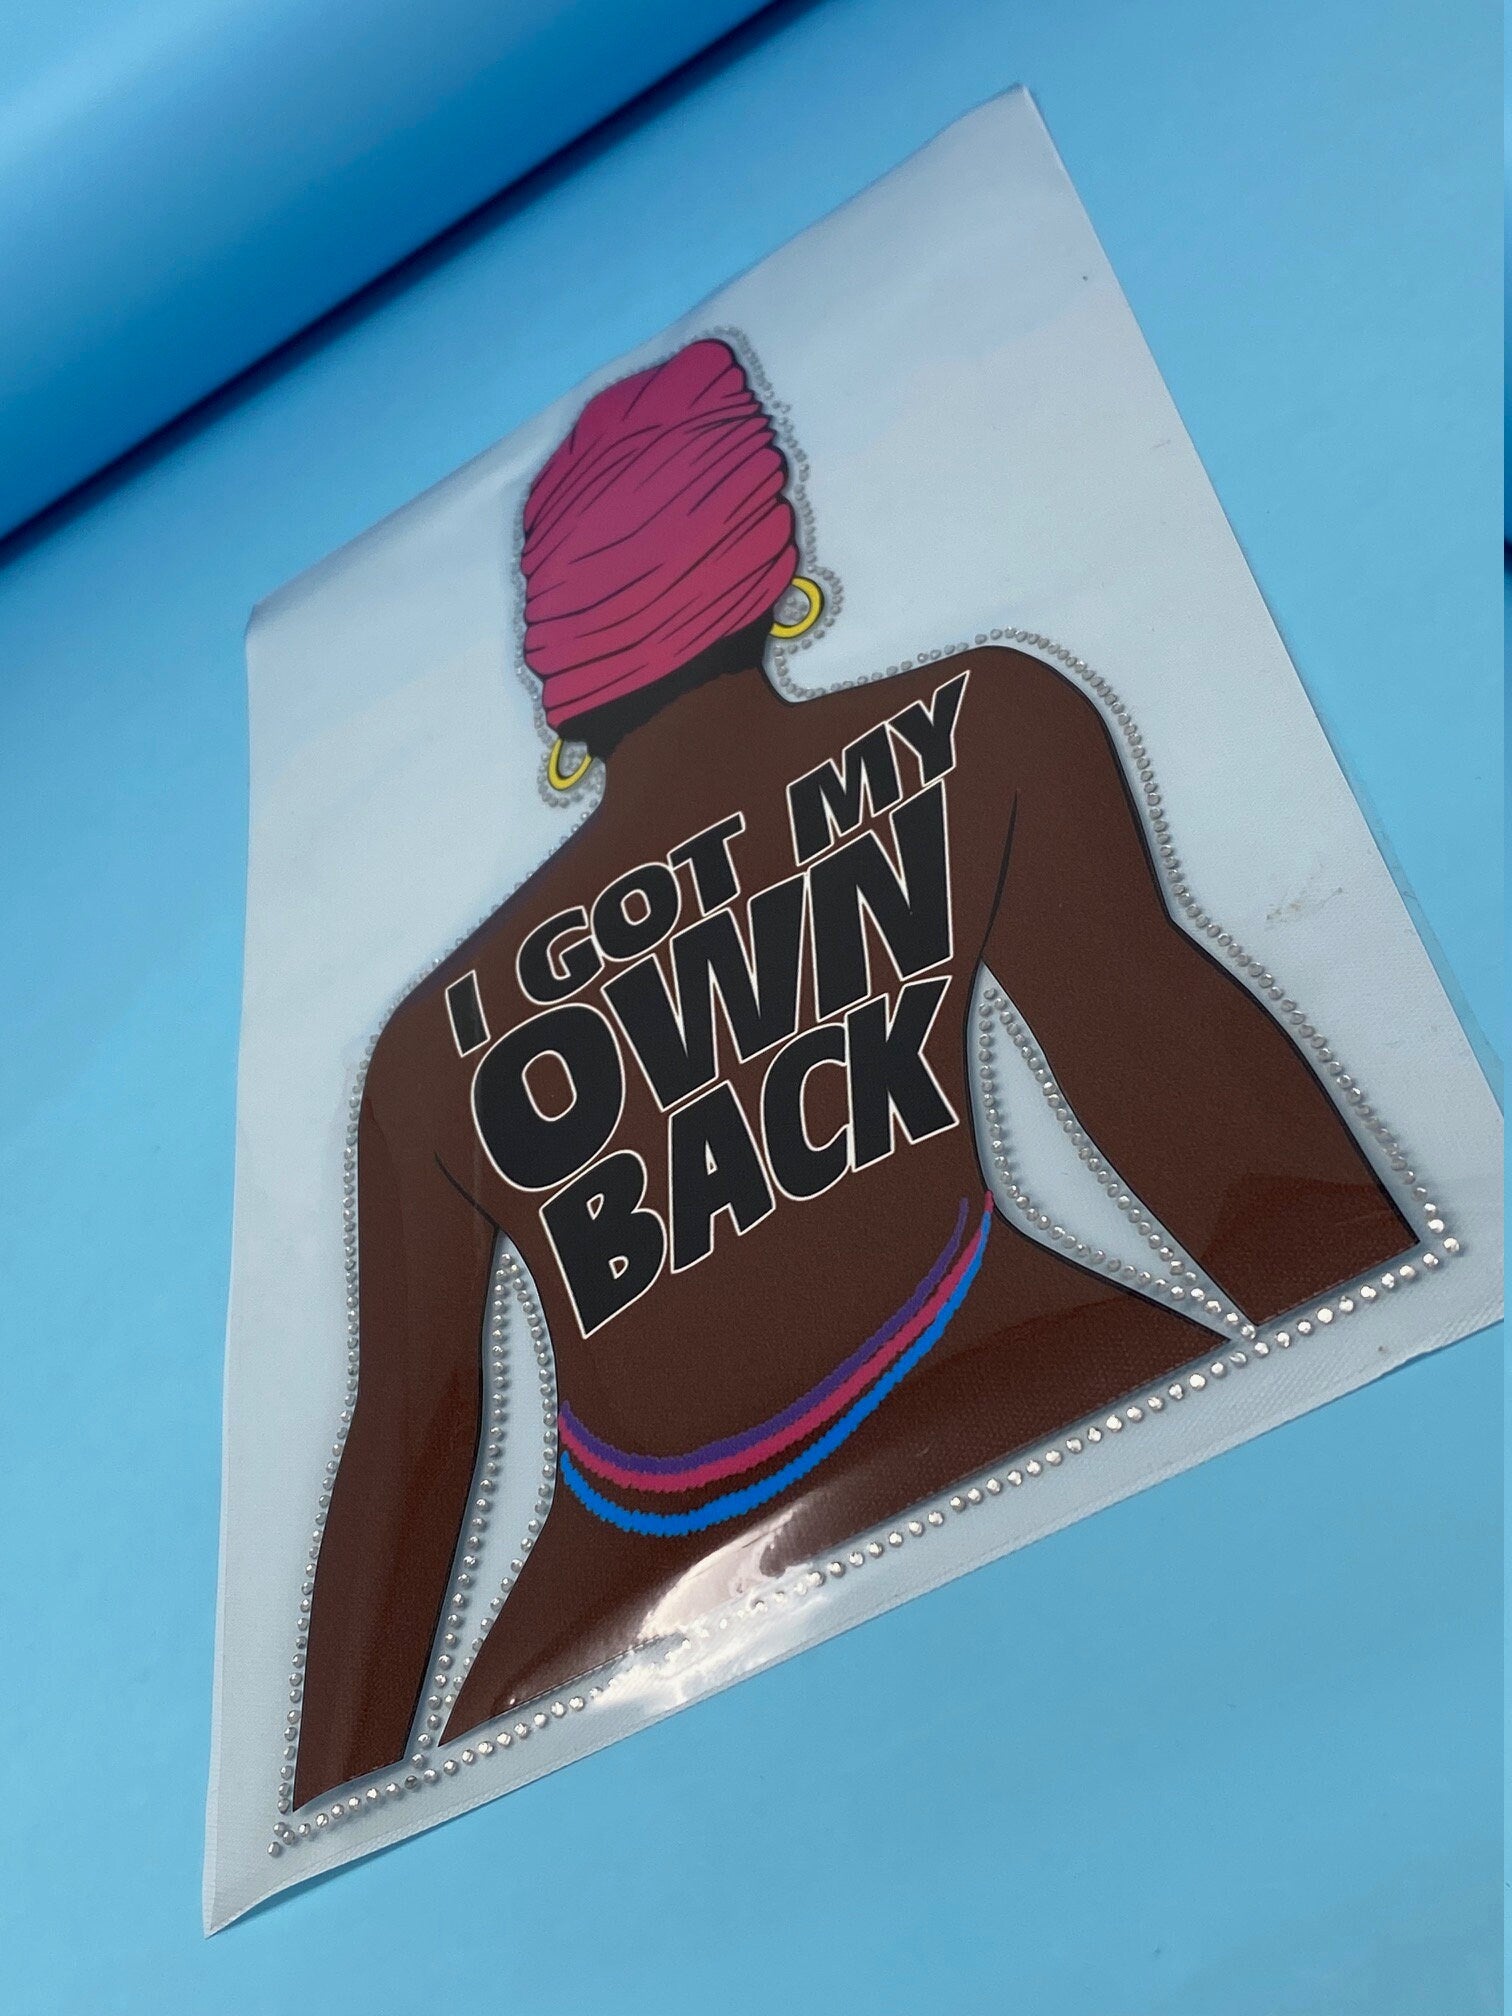 T-shirt Transfer Sheet, "I Got My Own Back!" outlined in blinging crystals for HEAT PRESSING on garments, Htv Appliques,